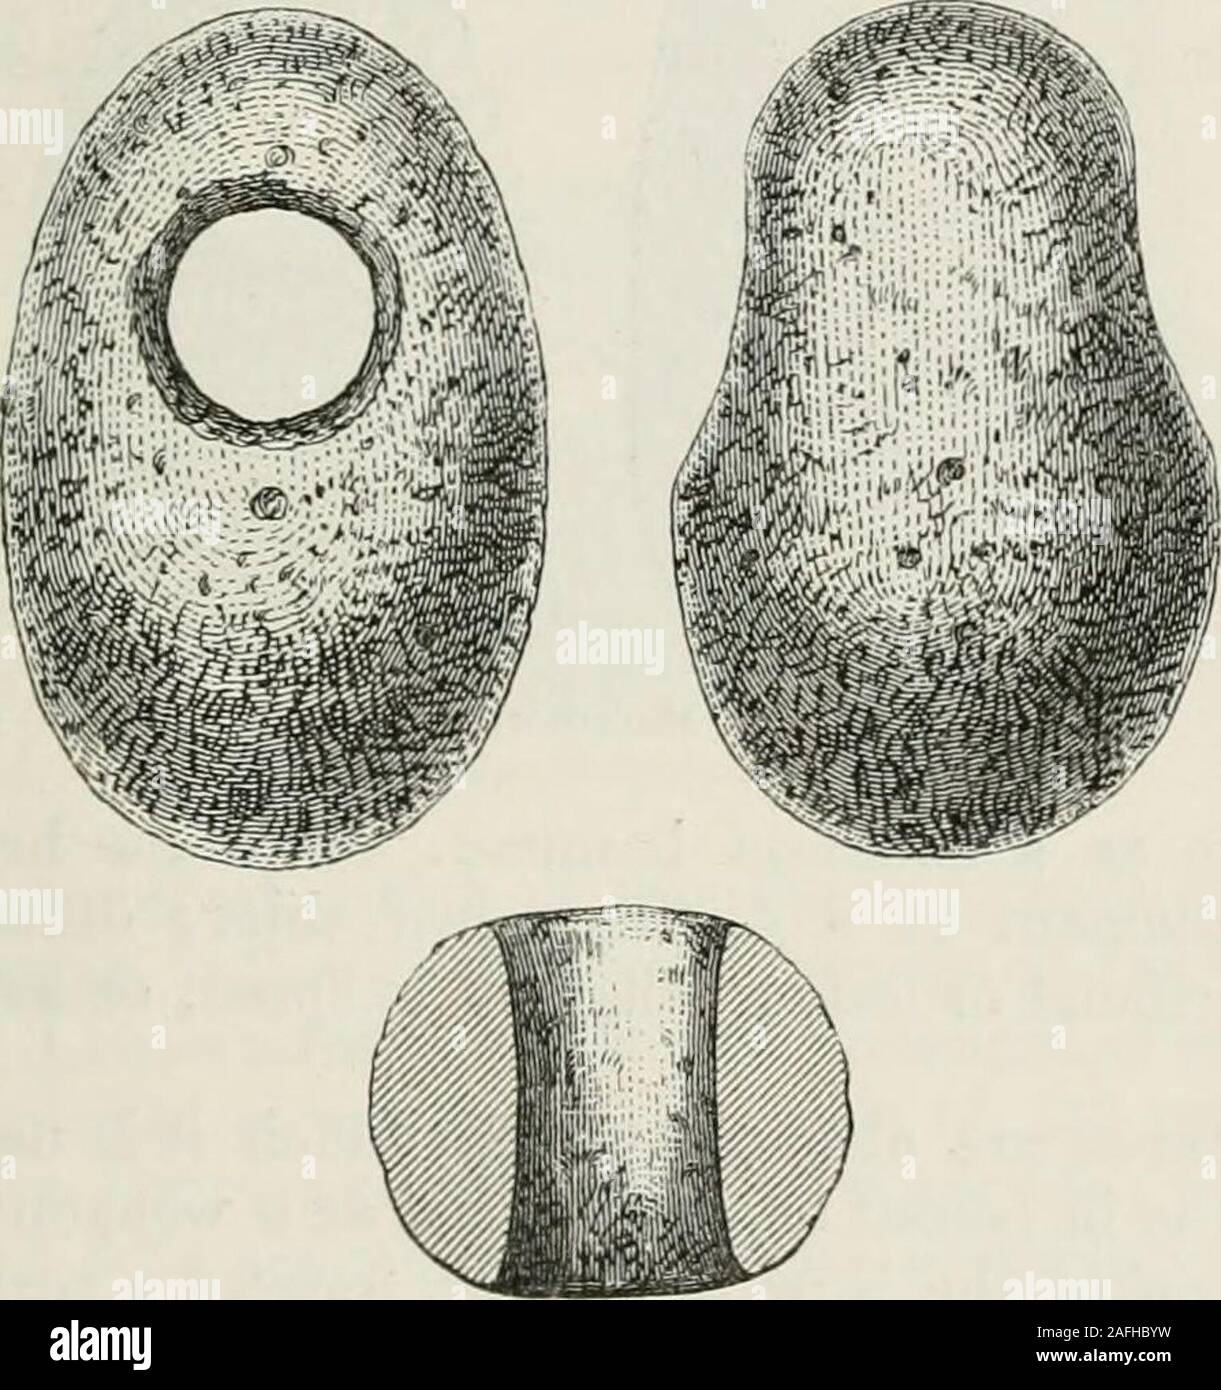 . The ancient stone implements, weapons, and ornaments, of Great Britain. rather flatter on one face, 3^ incheslong, found in Newport, Lincoln, is engraved in the ArchaoloijicalJournal.* An egg-shaped hammer, 3 inches long, of mica schist, and found inthe Isle of Arran,f is in the Antiquarian Museum at Edinburgh. Theshaft-hole is in the centre. Sometimes these hammer-heads are, in outline, of an intermediate formbetween Figs. 151 and 152, being oval in section, and more rounded atthe smaller end than the laiger, which is somewhat flattened. One such,in the Christy Collection, is formed of gran Stock Photo